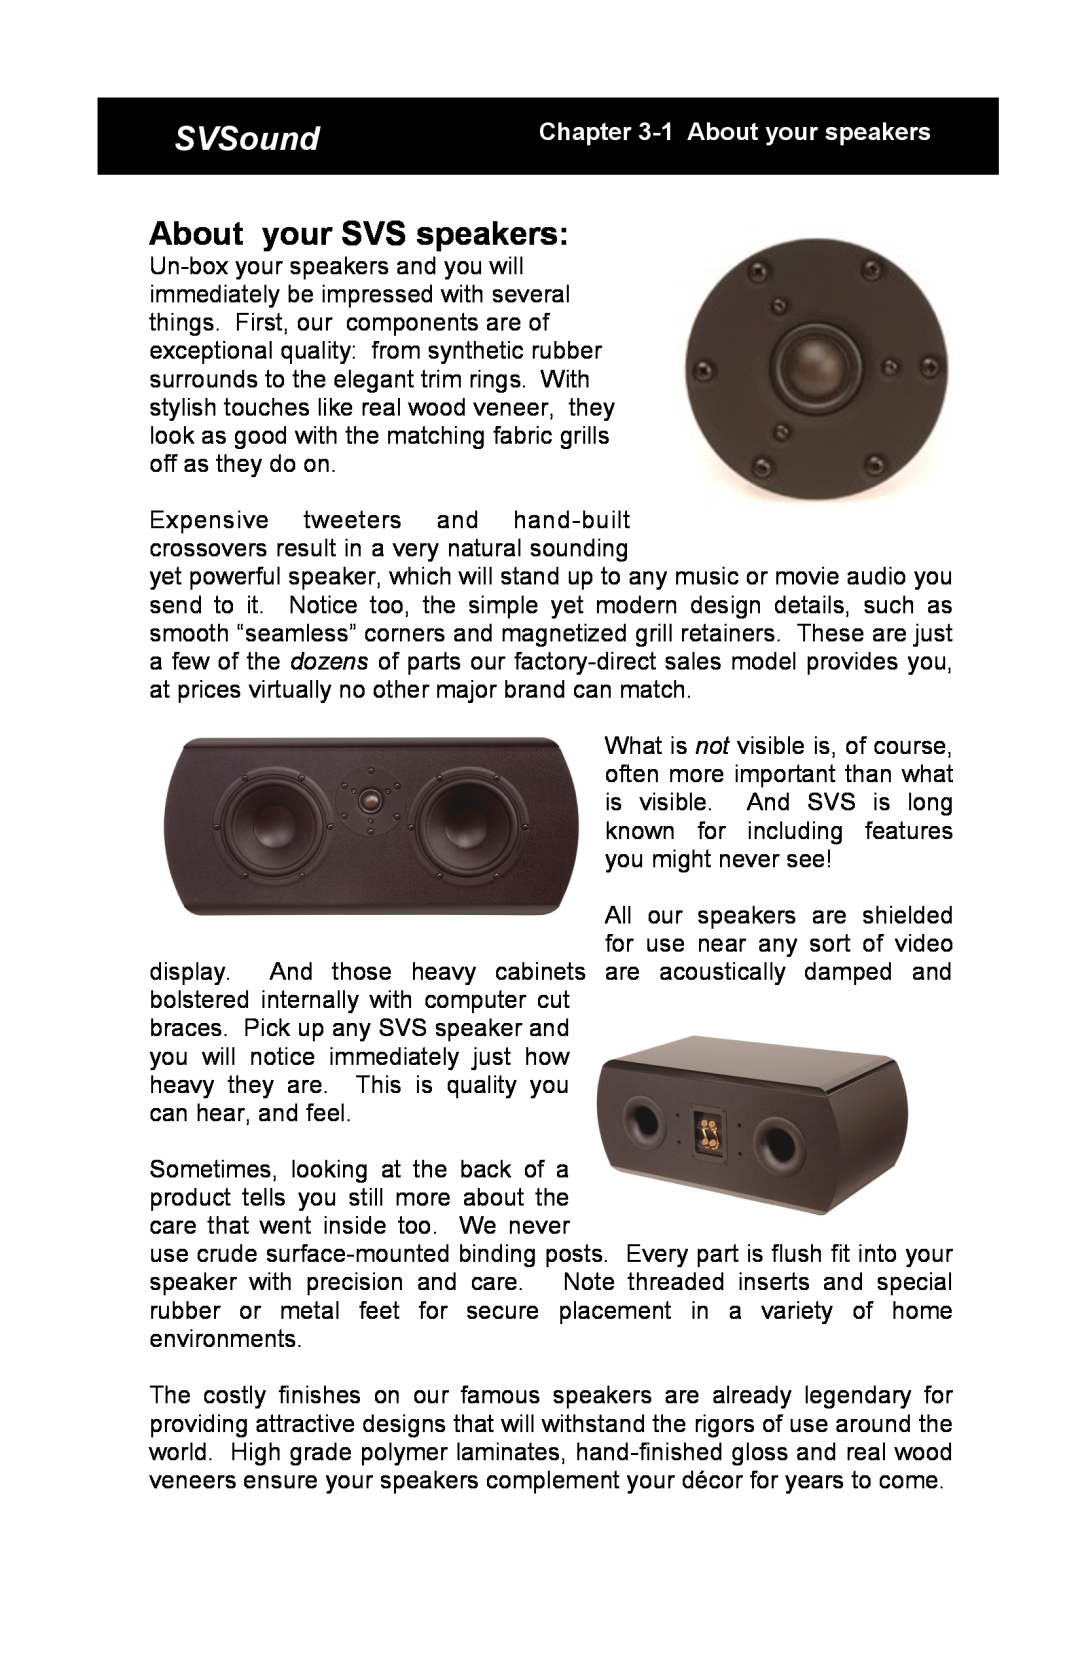 SV Sound SBS-01, MTS-01, SCS-01 specifications SVSoundubwoofers, About your SVS speakers, 1About your speakers 